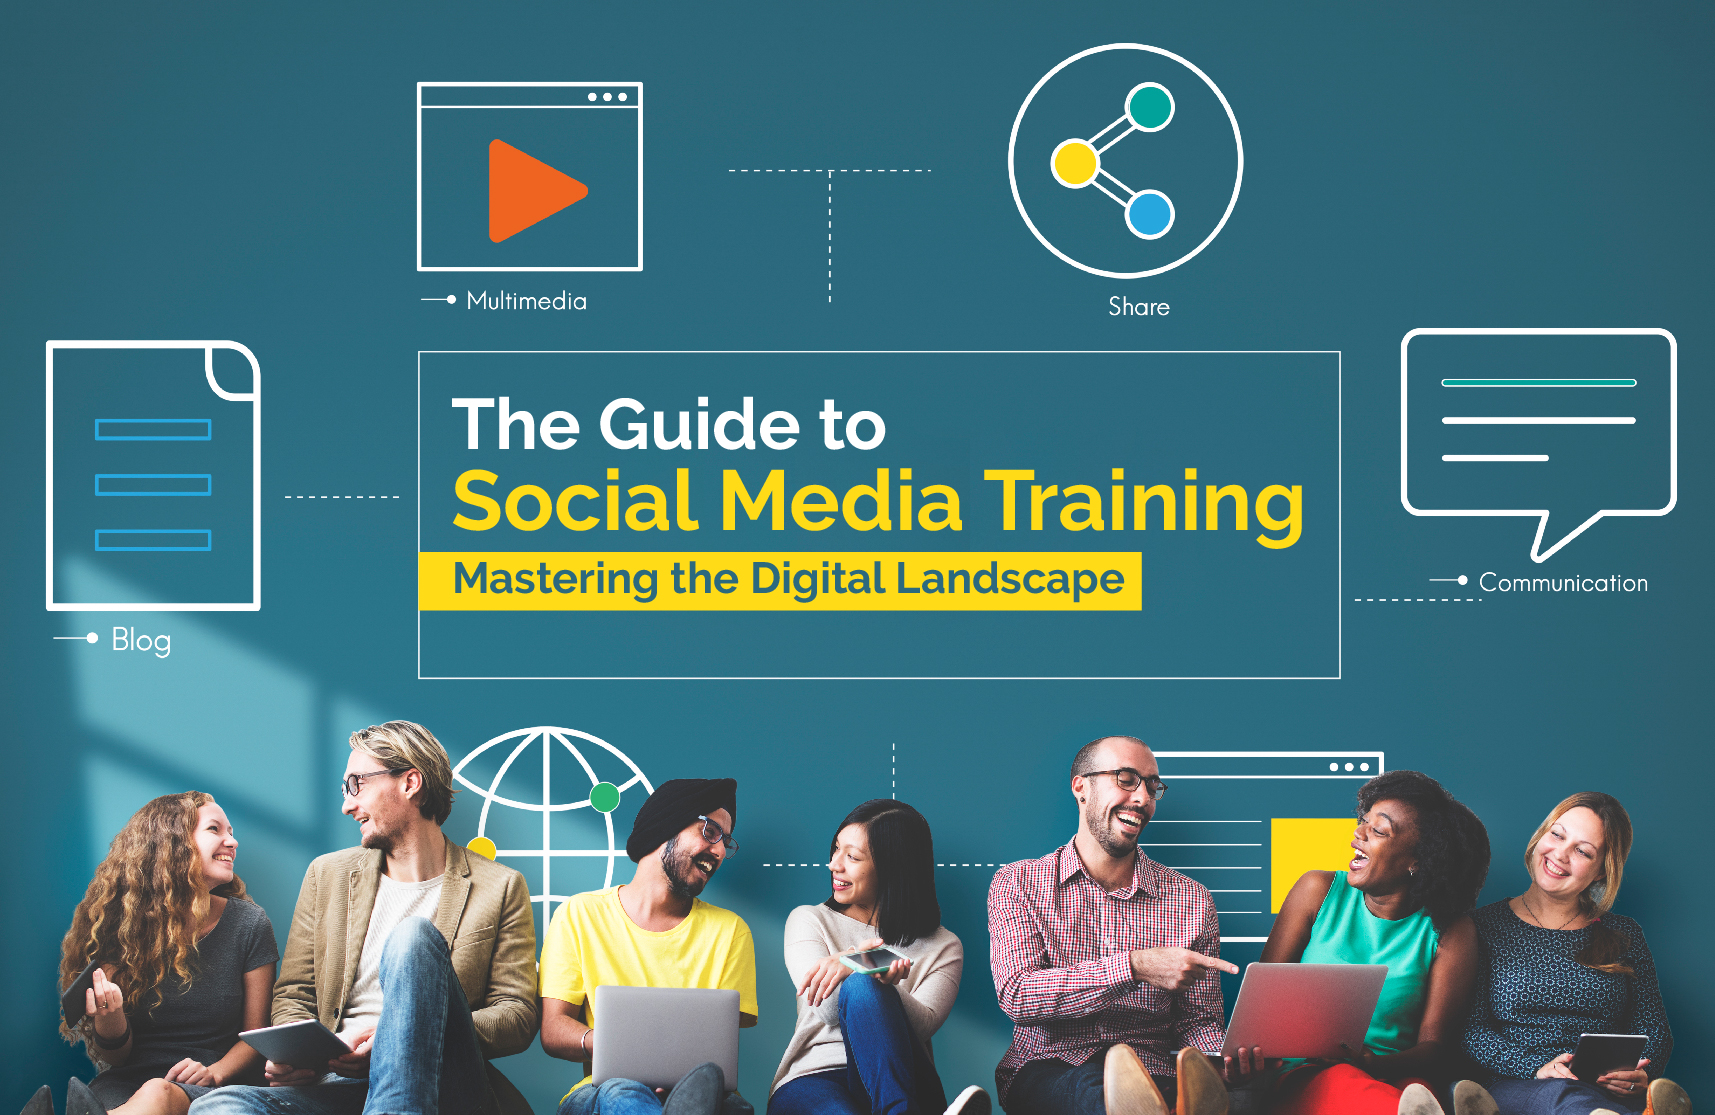 The Guide to Social Media Training: Mastering the Digital Landscape